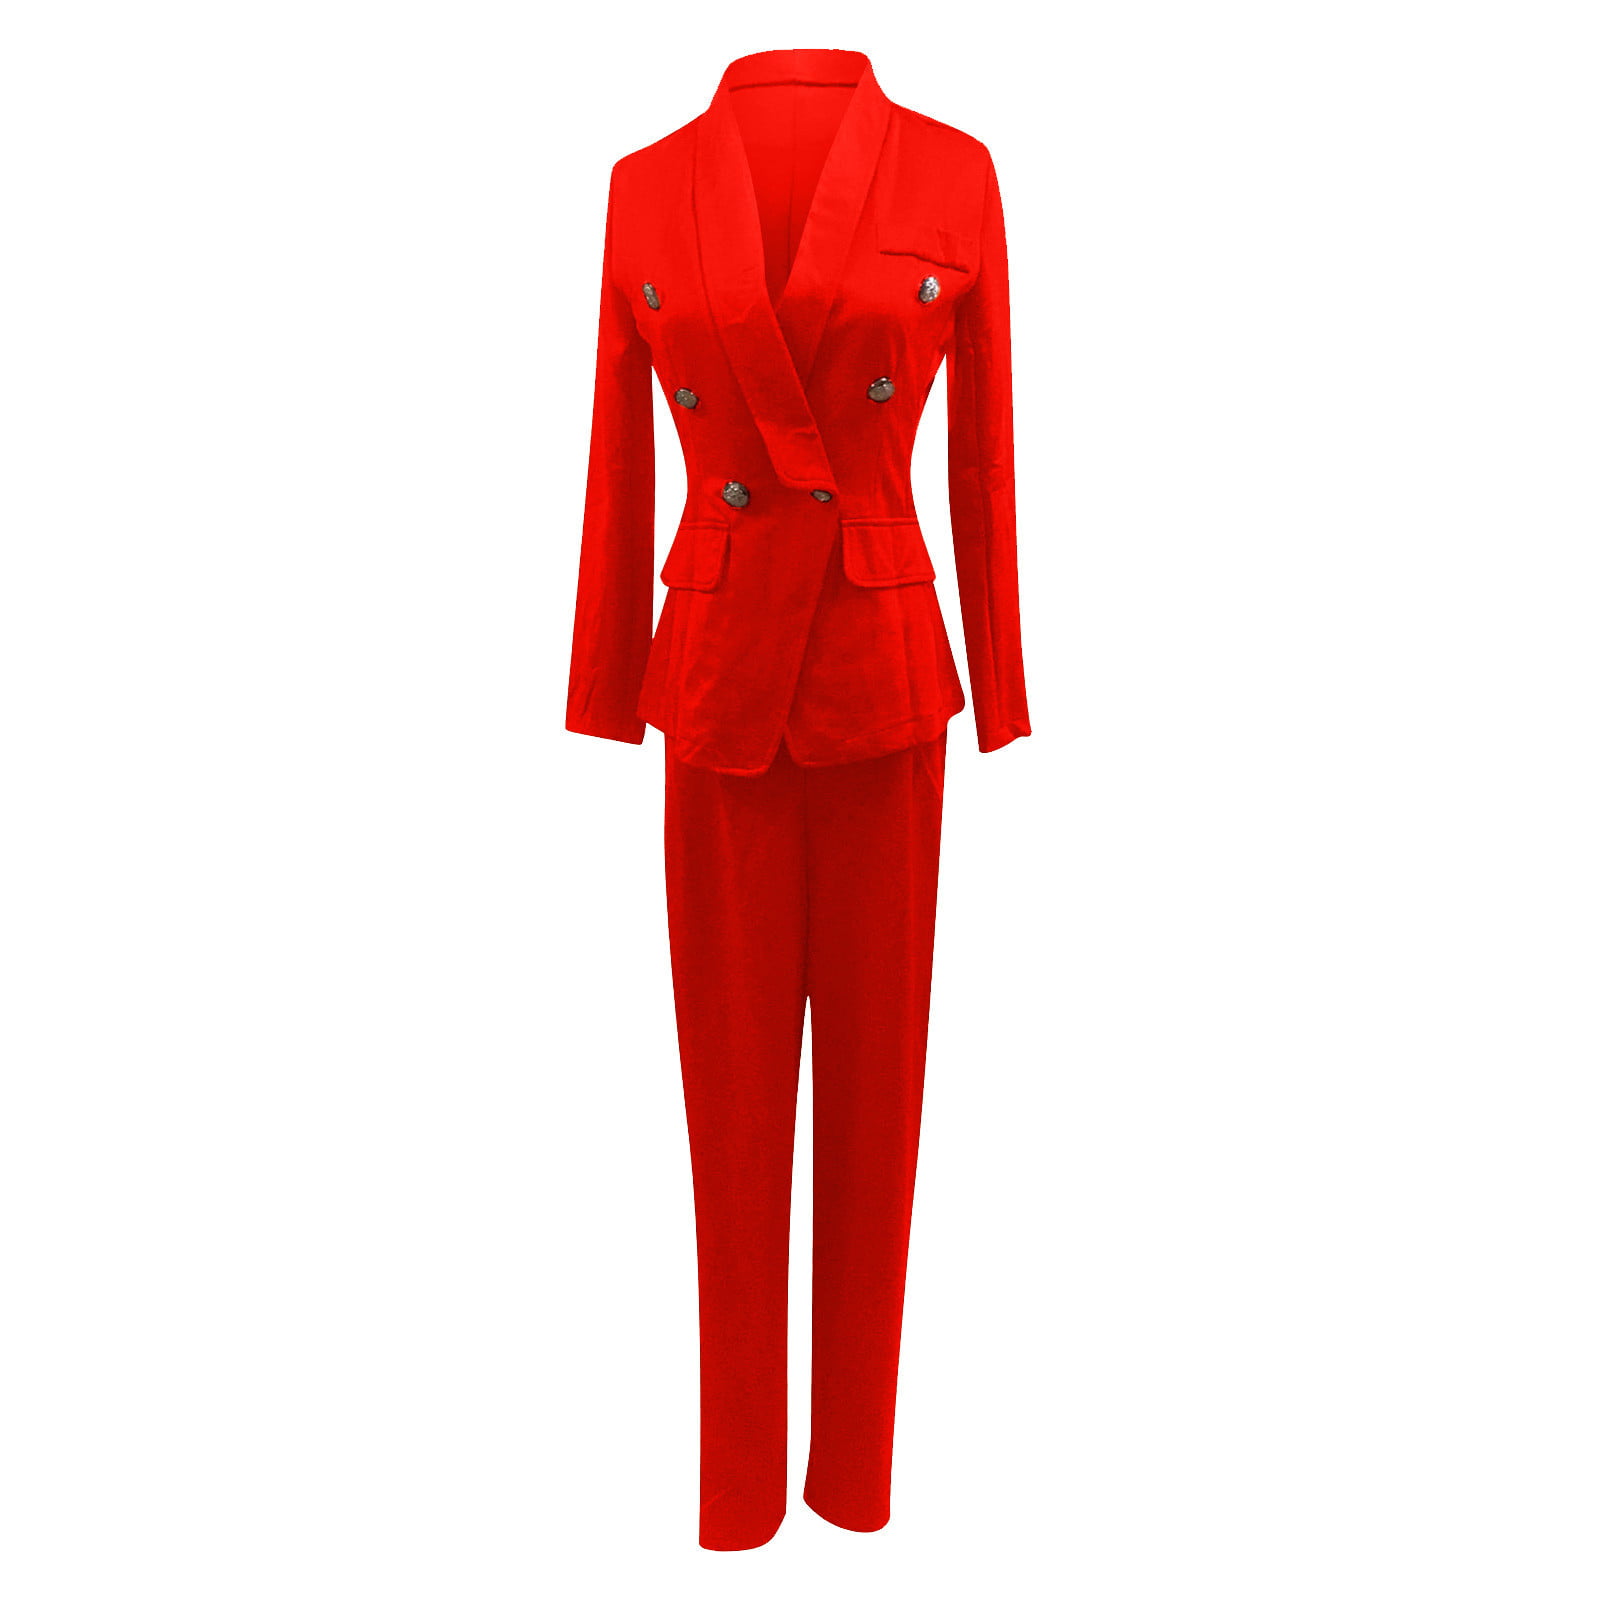 Blazer and Pants Suit For Women Formal Office Suits Long Sleeve Business  Work Wear Black Khaki Wine Red Spring Fall 2 Piece Set